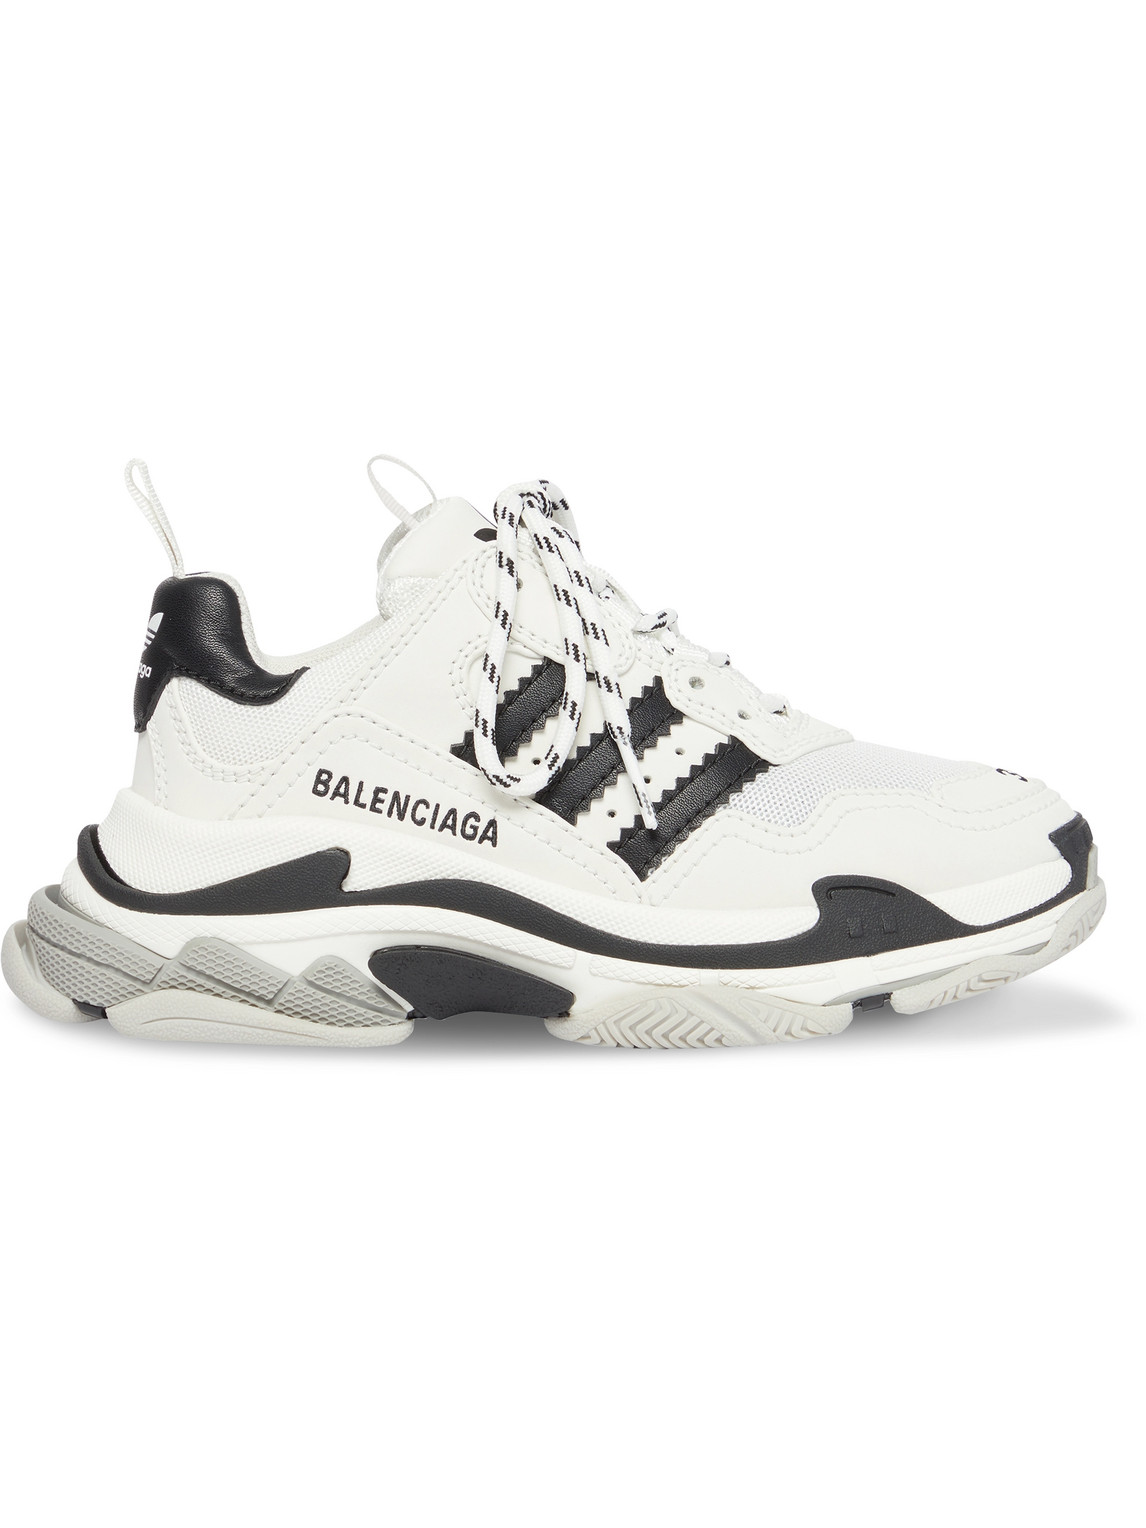 BALENCIAGA ADIDAS TRIPLE S LEATHER AND MESH SNEAKERS